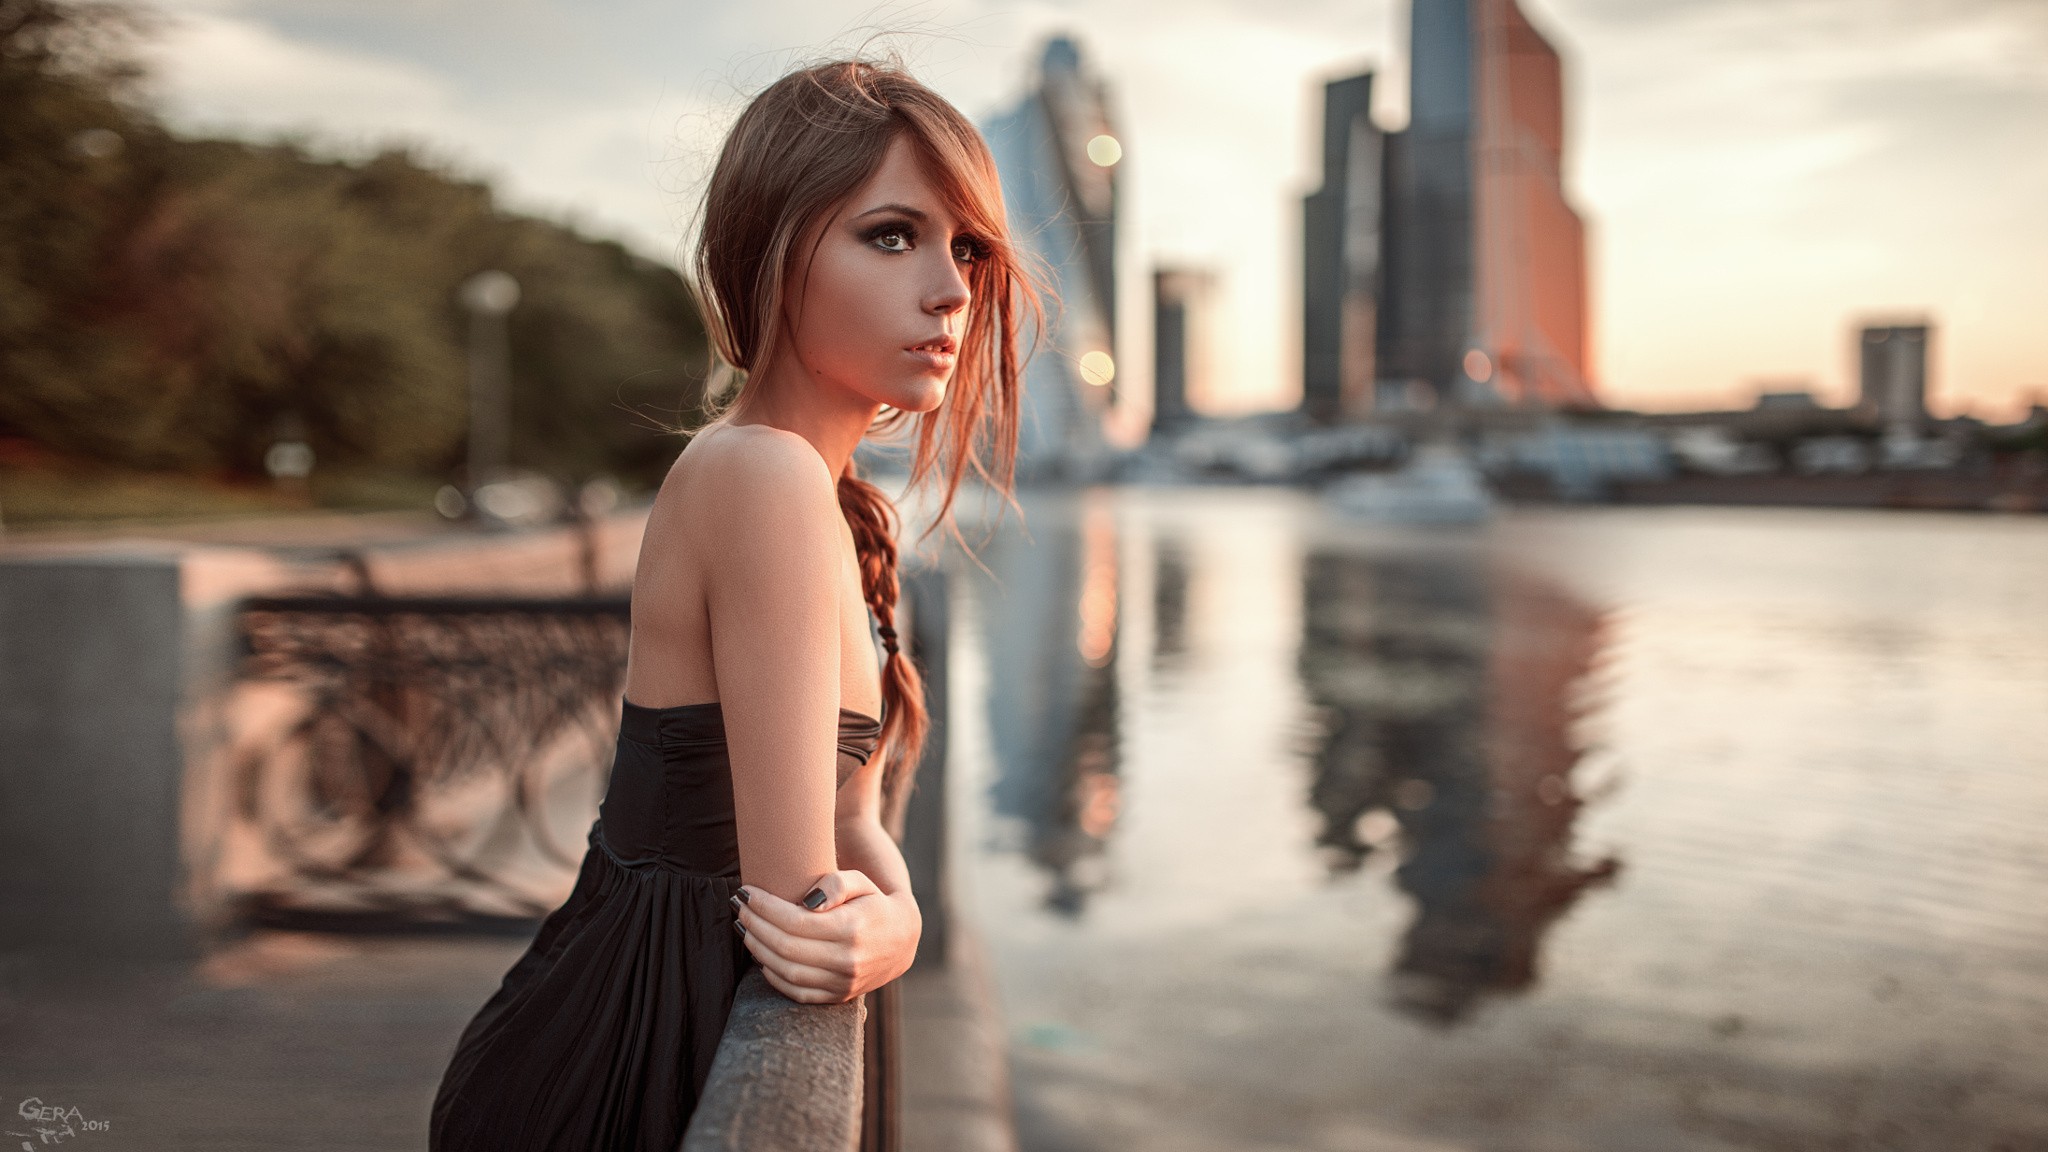 People 2048x1152 women model face portrait city river Ksenia Kokoreva Georgy Chernyadyev women outdoors makeup smoky eyes painted nails 2015 (Year) looking into the distance Russian Russian women Russian model urban black clothing black nails watermarked Moscow water Russia